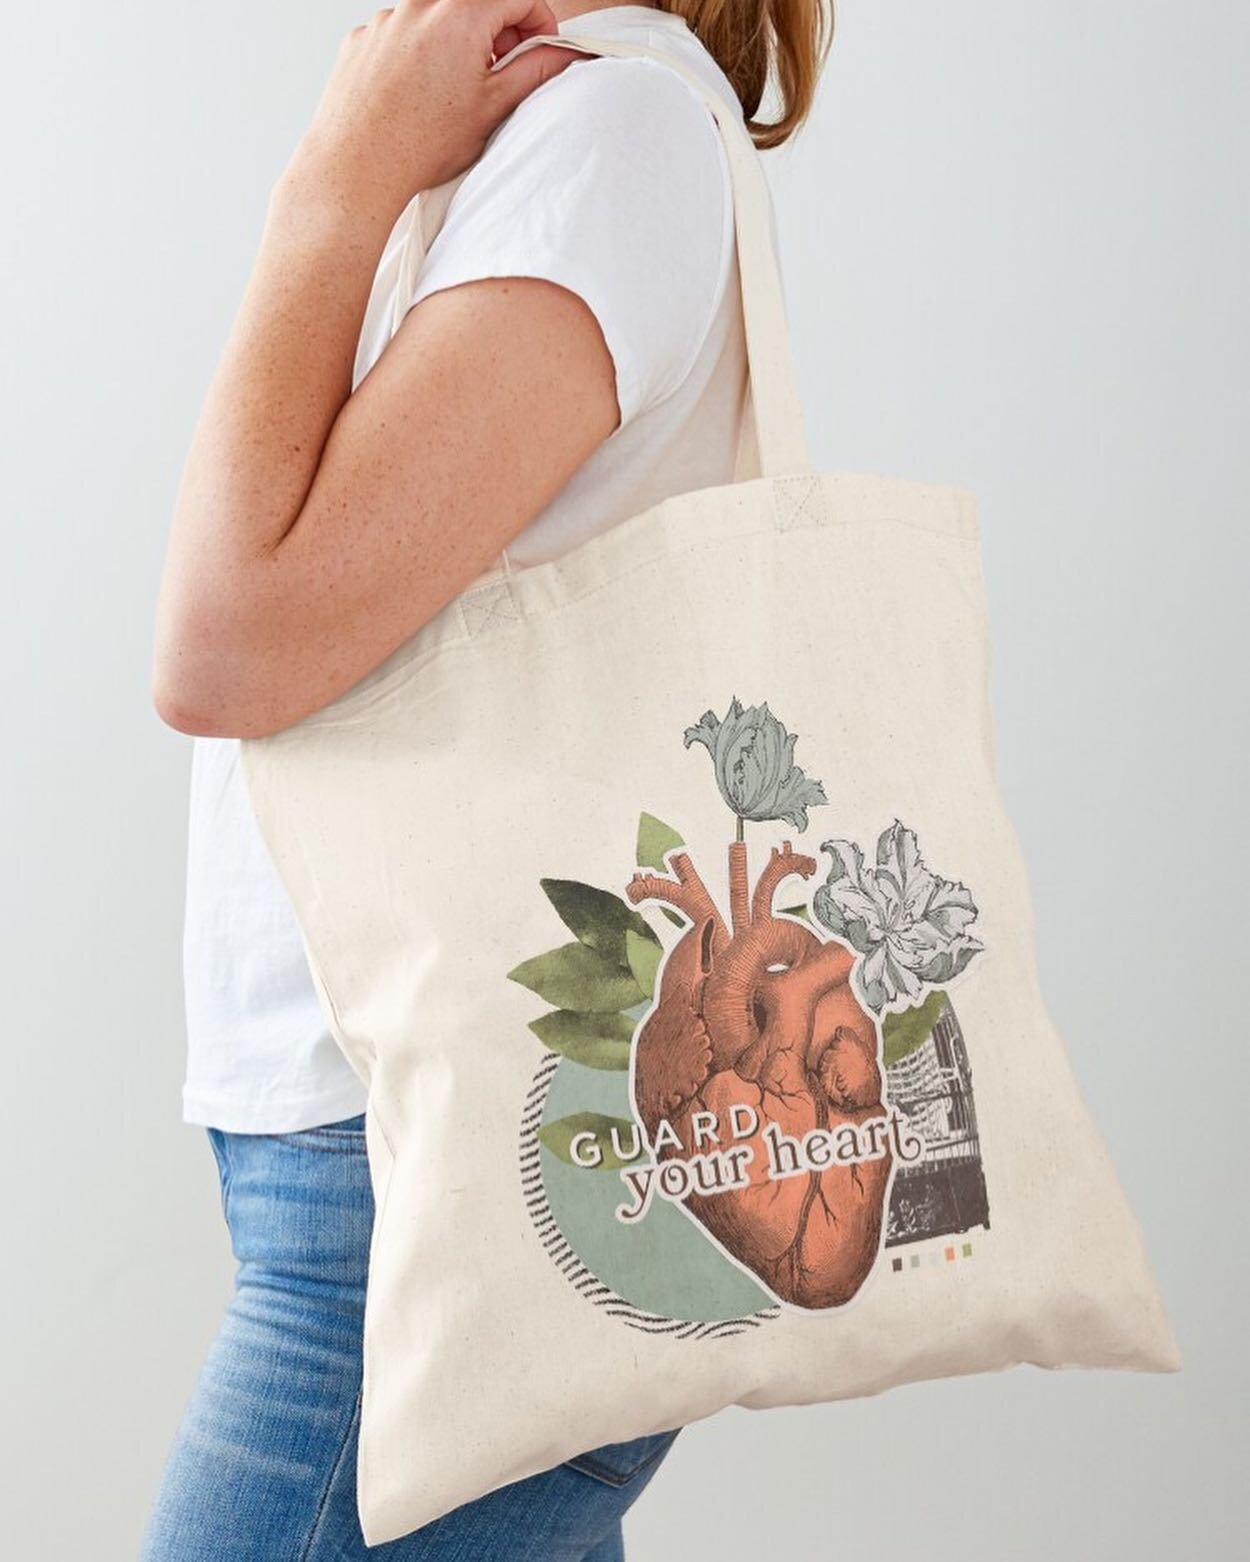 Guard your heart. Designed using public domain images. ♻️ ❤️
⠀⠀⠀⠀⠀⠀⠀⠀⠀
Guard Your Heart Totes, Tees + Other Products Available Here: rdbl.co/2Gltc3q
⠀⠀⠀⠀⠀⠀⠀⠀⠀
⠀⠀⠀⠀⠀⠀⠀⠀⠀
⠀⠀⠀⠀⠀⠀⠀⠀⠀
⠀⠀⠀⠀⠀⠀⠀⠀⠀
⠀⠀⠀⠀⠀⠀⠀⠀⠀
#missyrobbsgdp #freelancegraphicdesigner #freelance